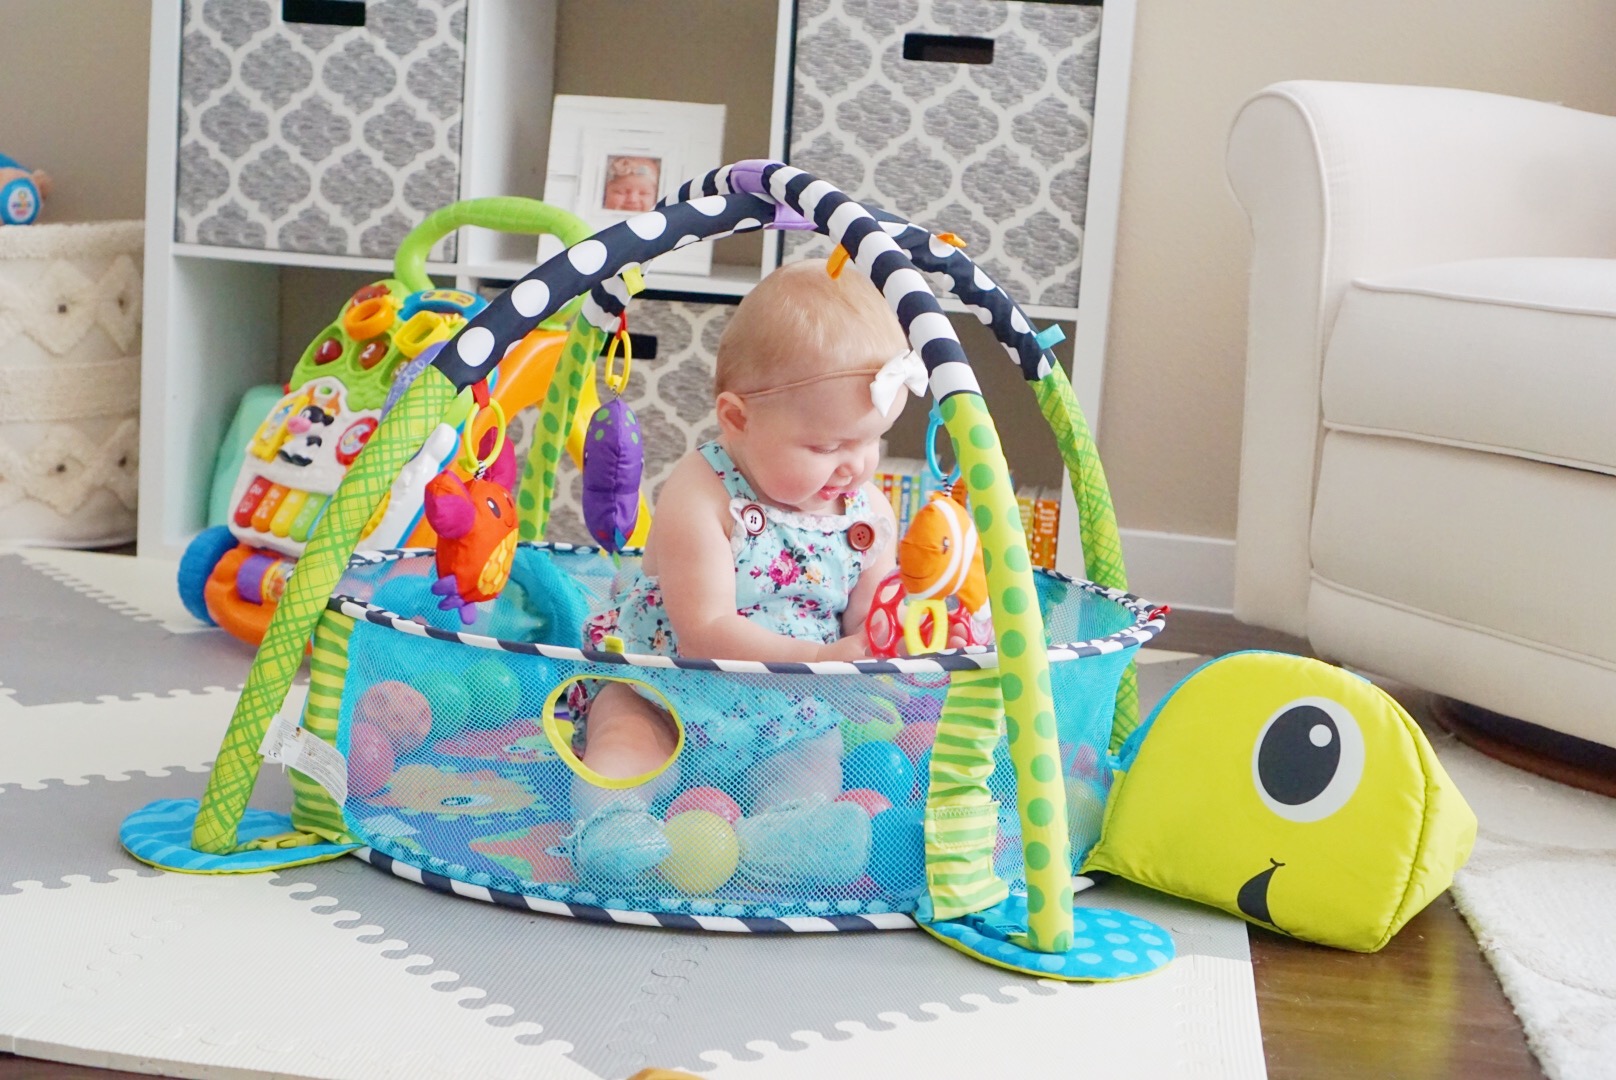 Katelyn Jones A Touch of Pink buybuy BABY The Infantino Grow-With-Me Activity Gym